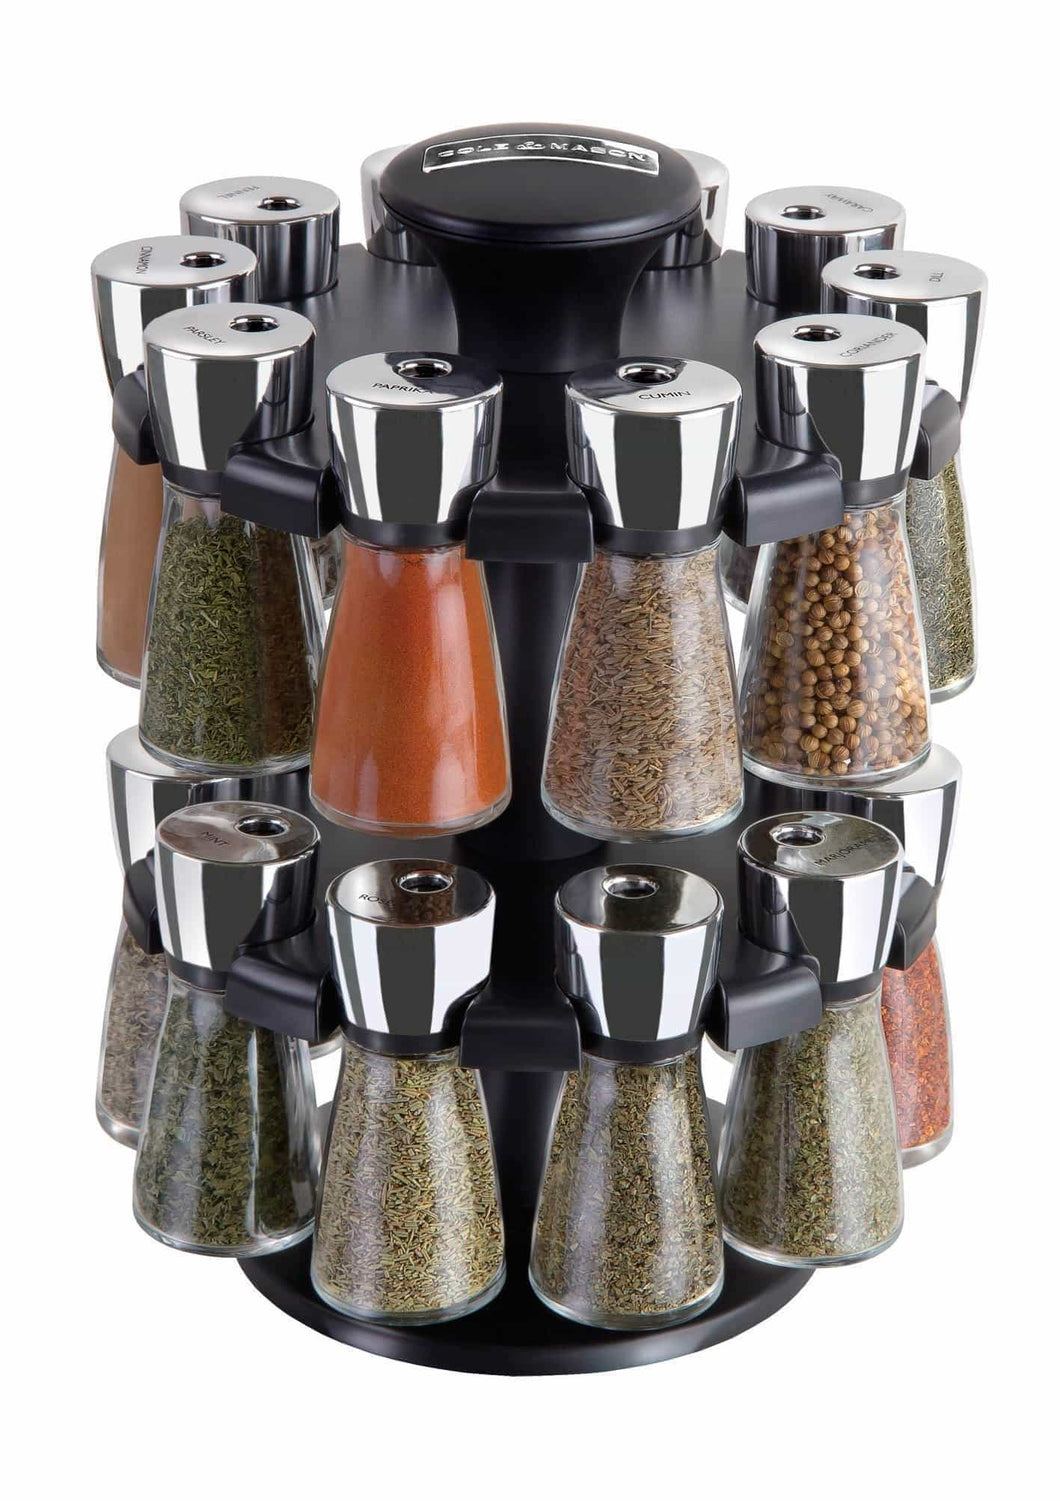 Cole & Mason Herb and Spice Rack with Spices - Revolving Countertop Carousel Set Includes 20 Filled Glass Jar Bottles - Productive Organizing